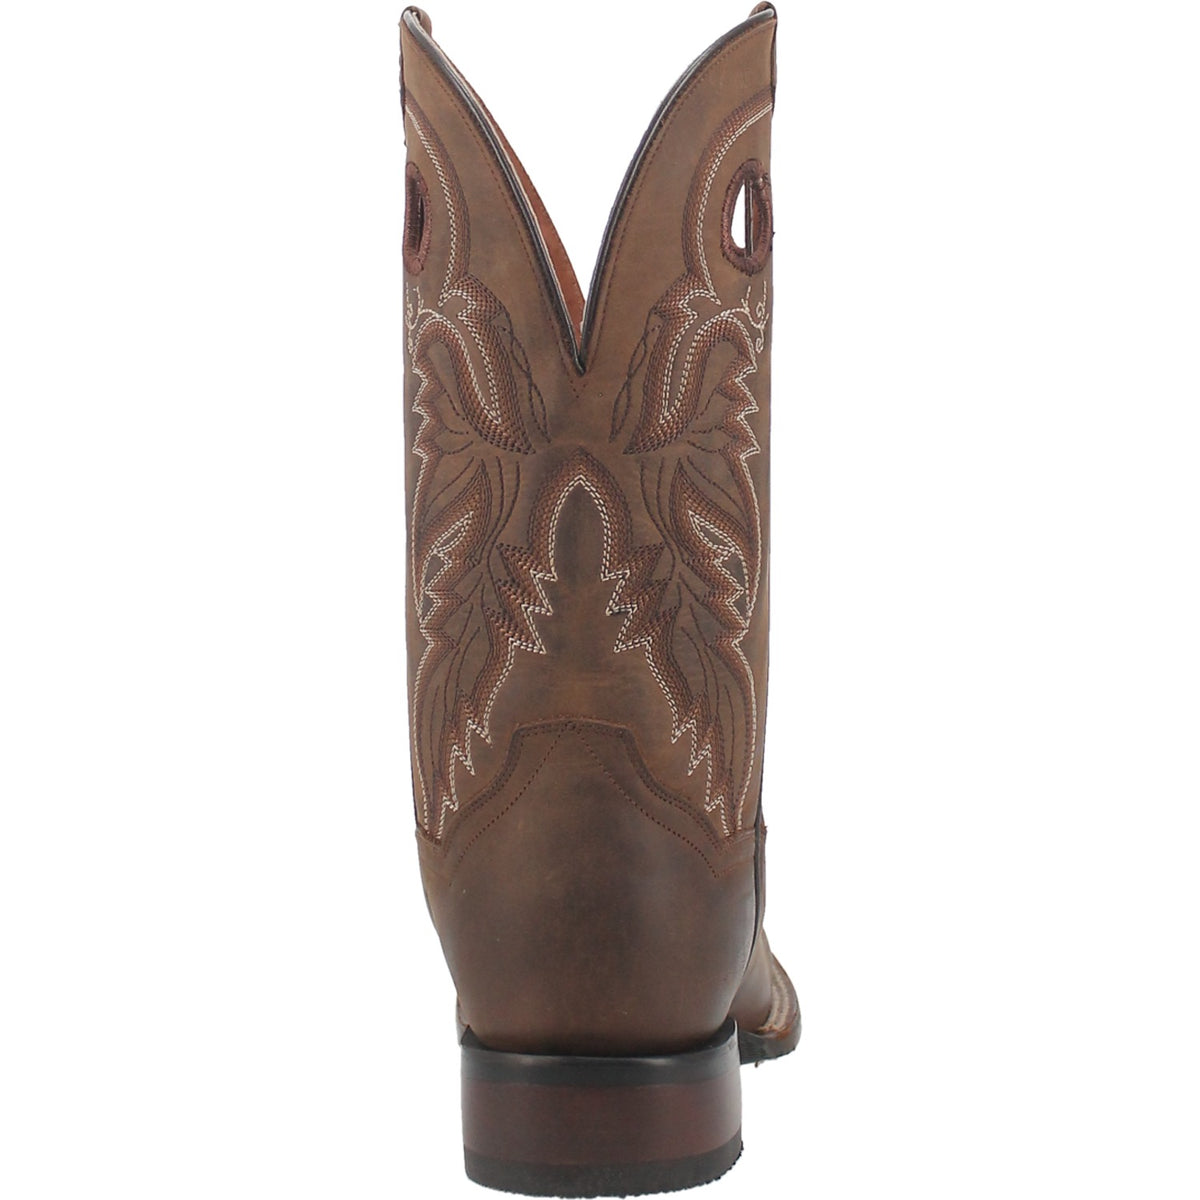 ABRAM LEATHER BOOT Cover